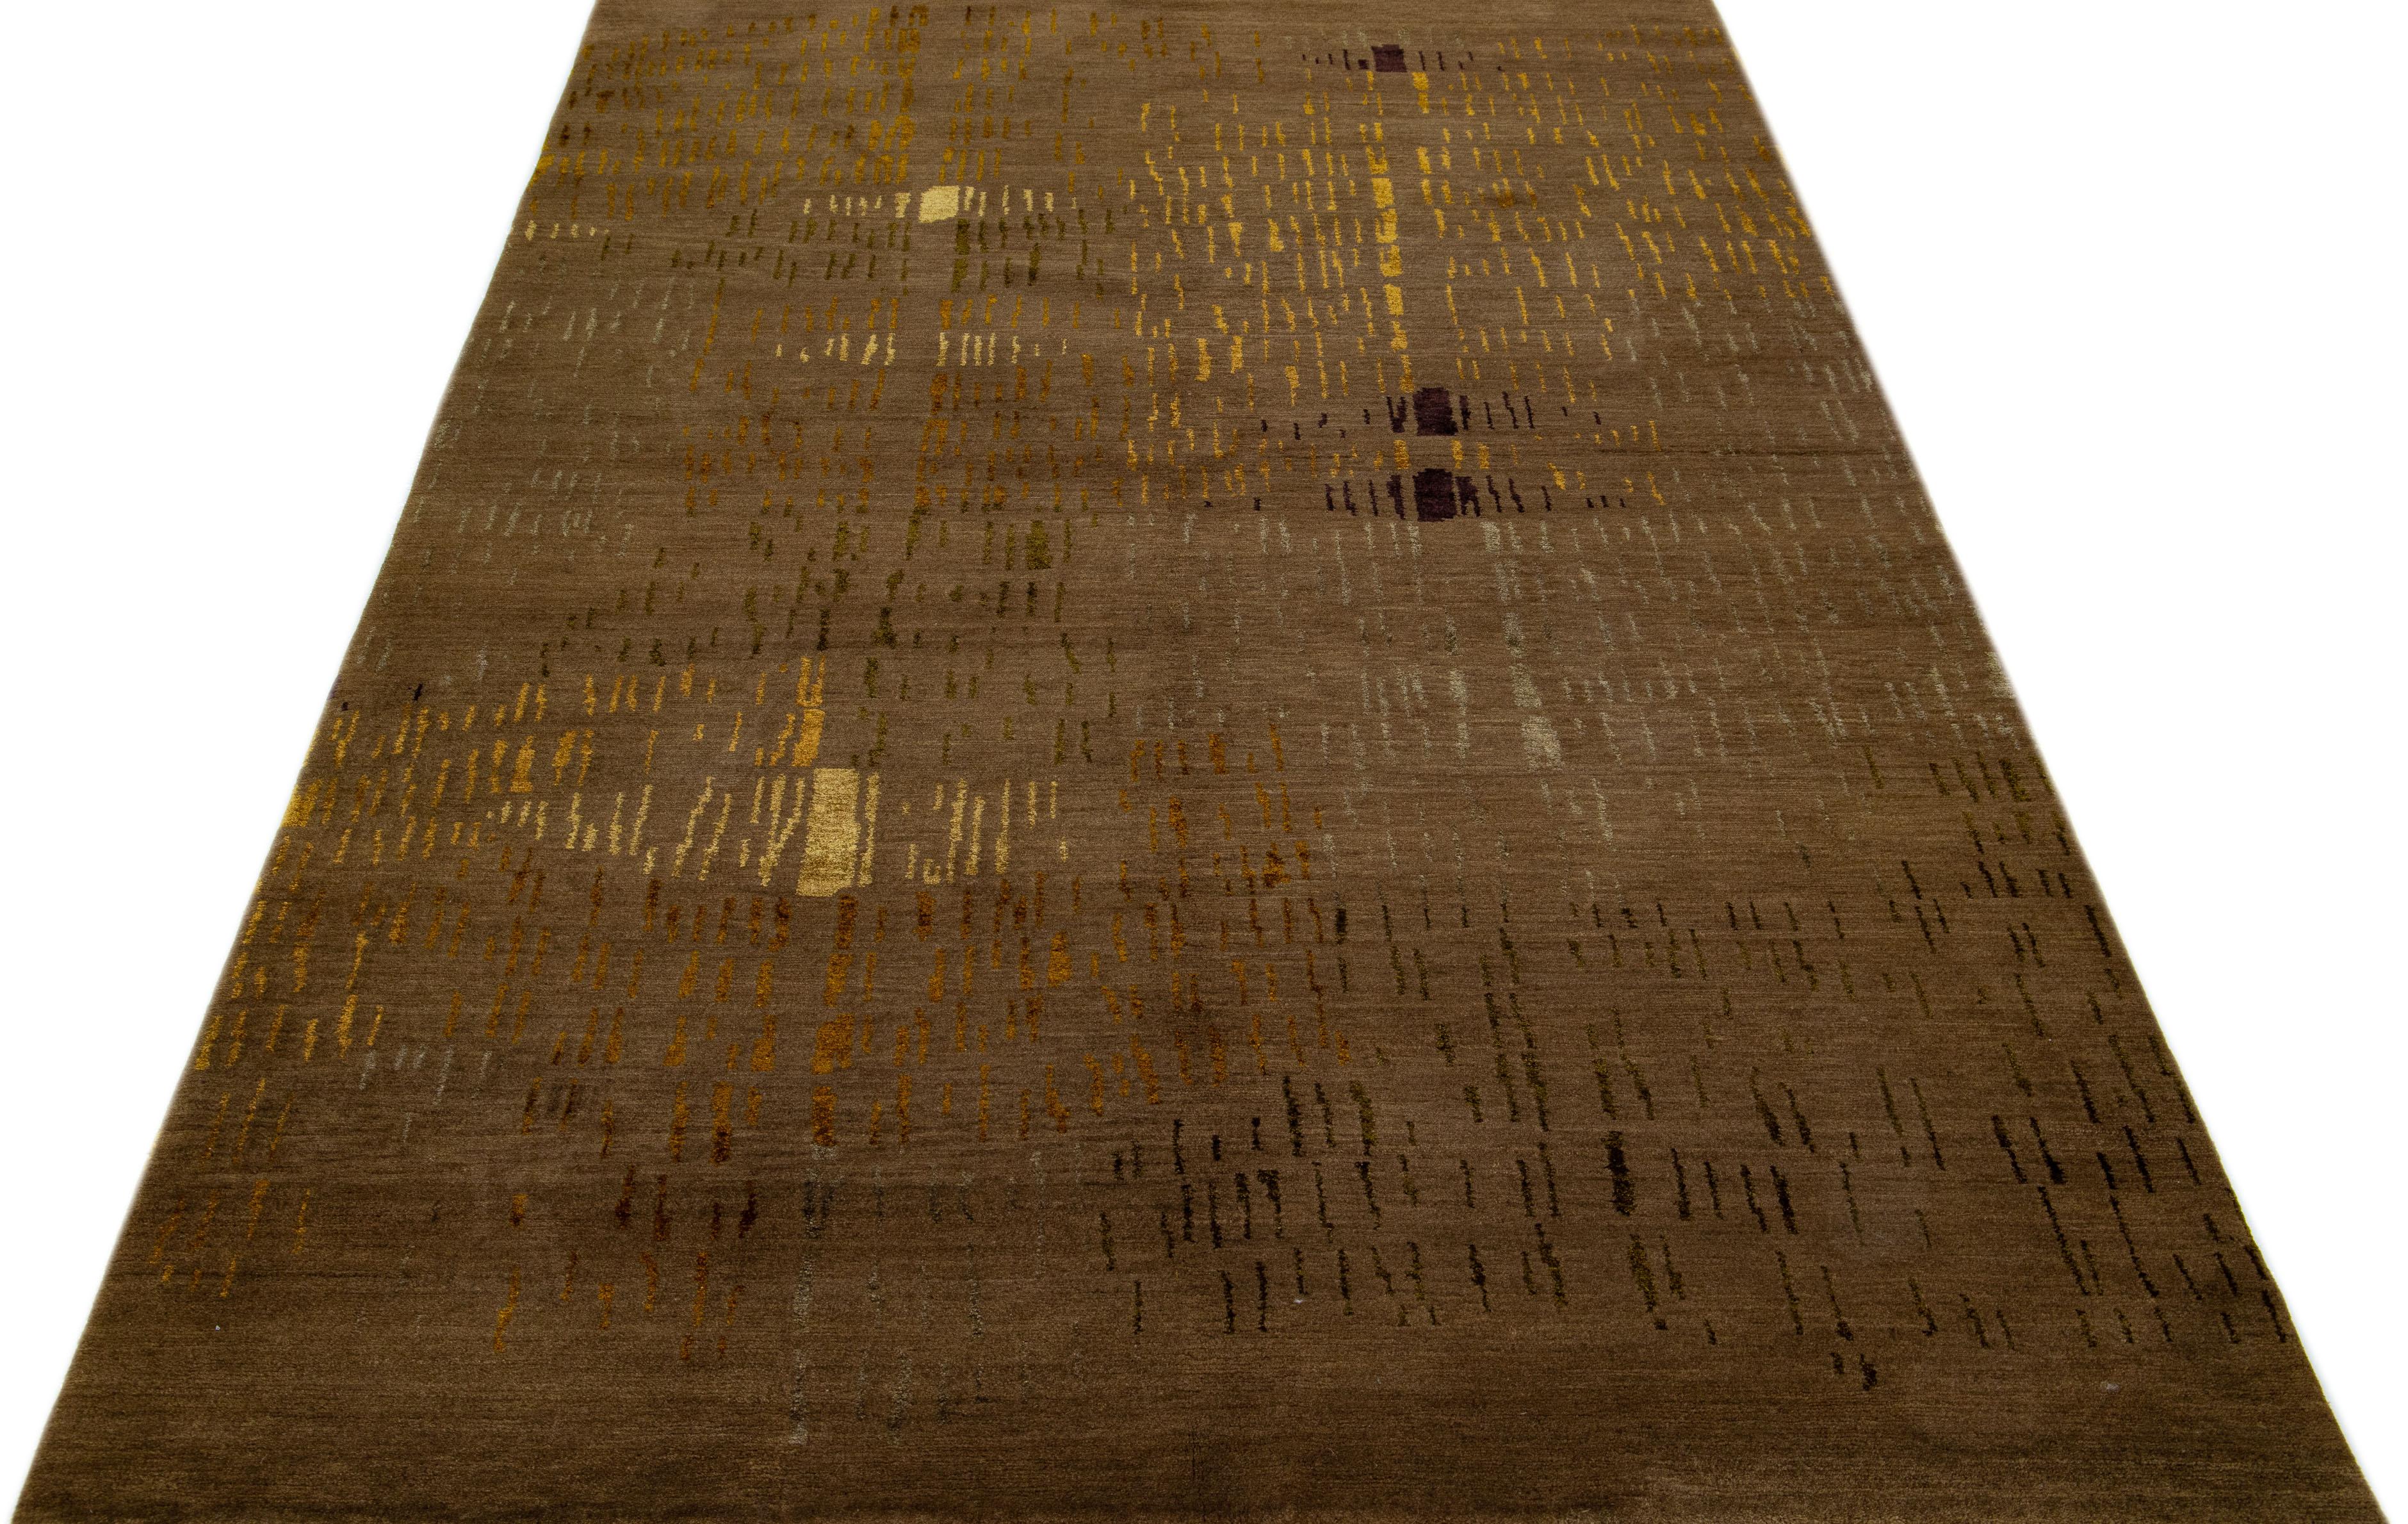 This modern Nepalese rug has been skillfully fashioned from premium wool and silk materials, showcasing a sophisticated abstract pattern in deep shades of brown, elegantly highlighted by lavish black and golden embellishments.

This rug measures